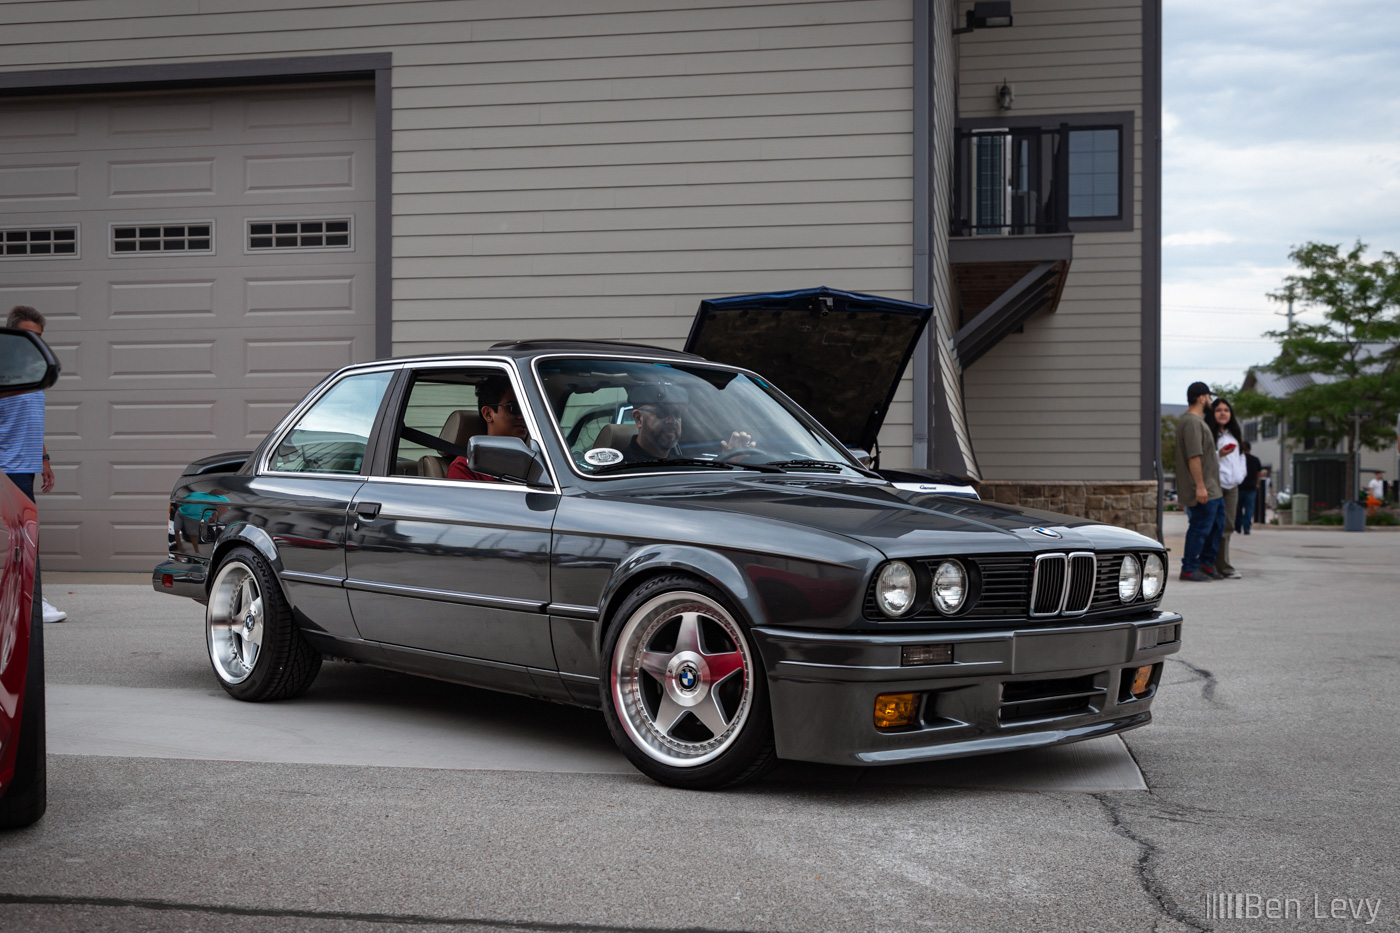 Grey BMW 325e Coupe at Iron Gate